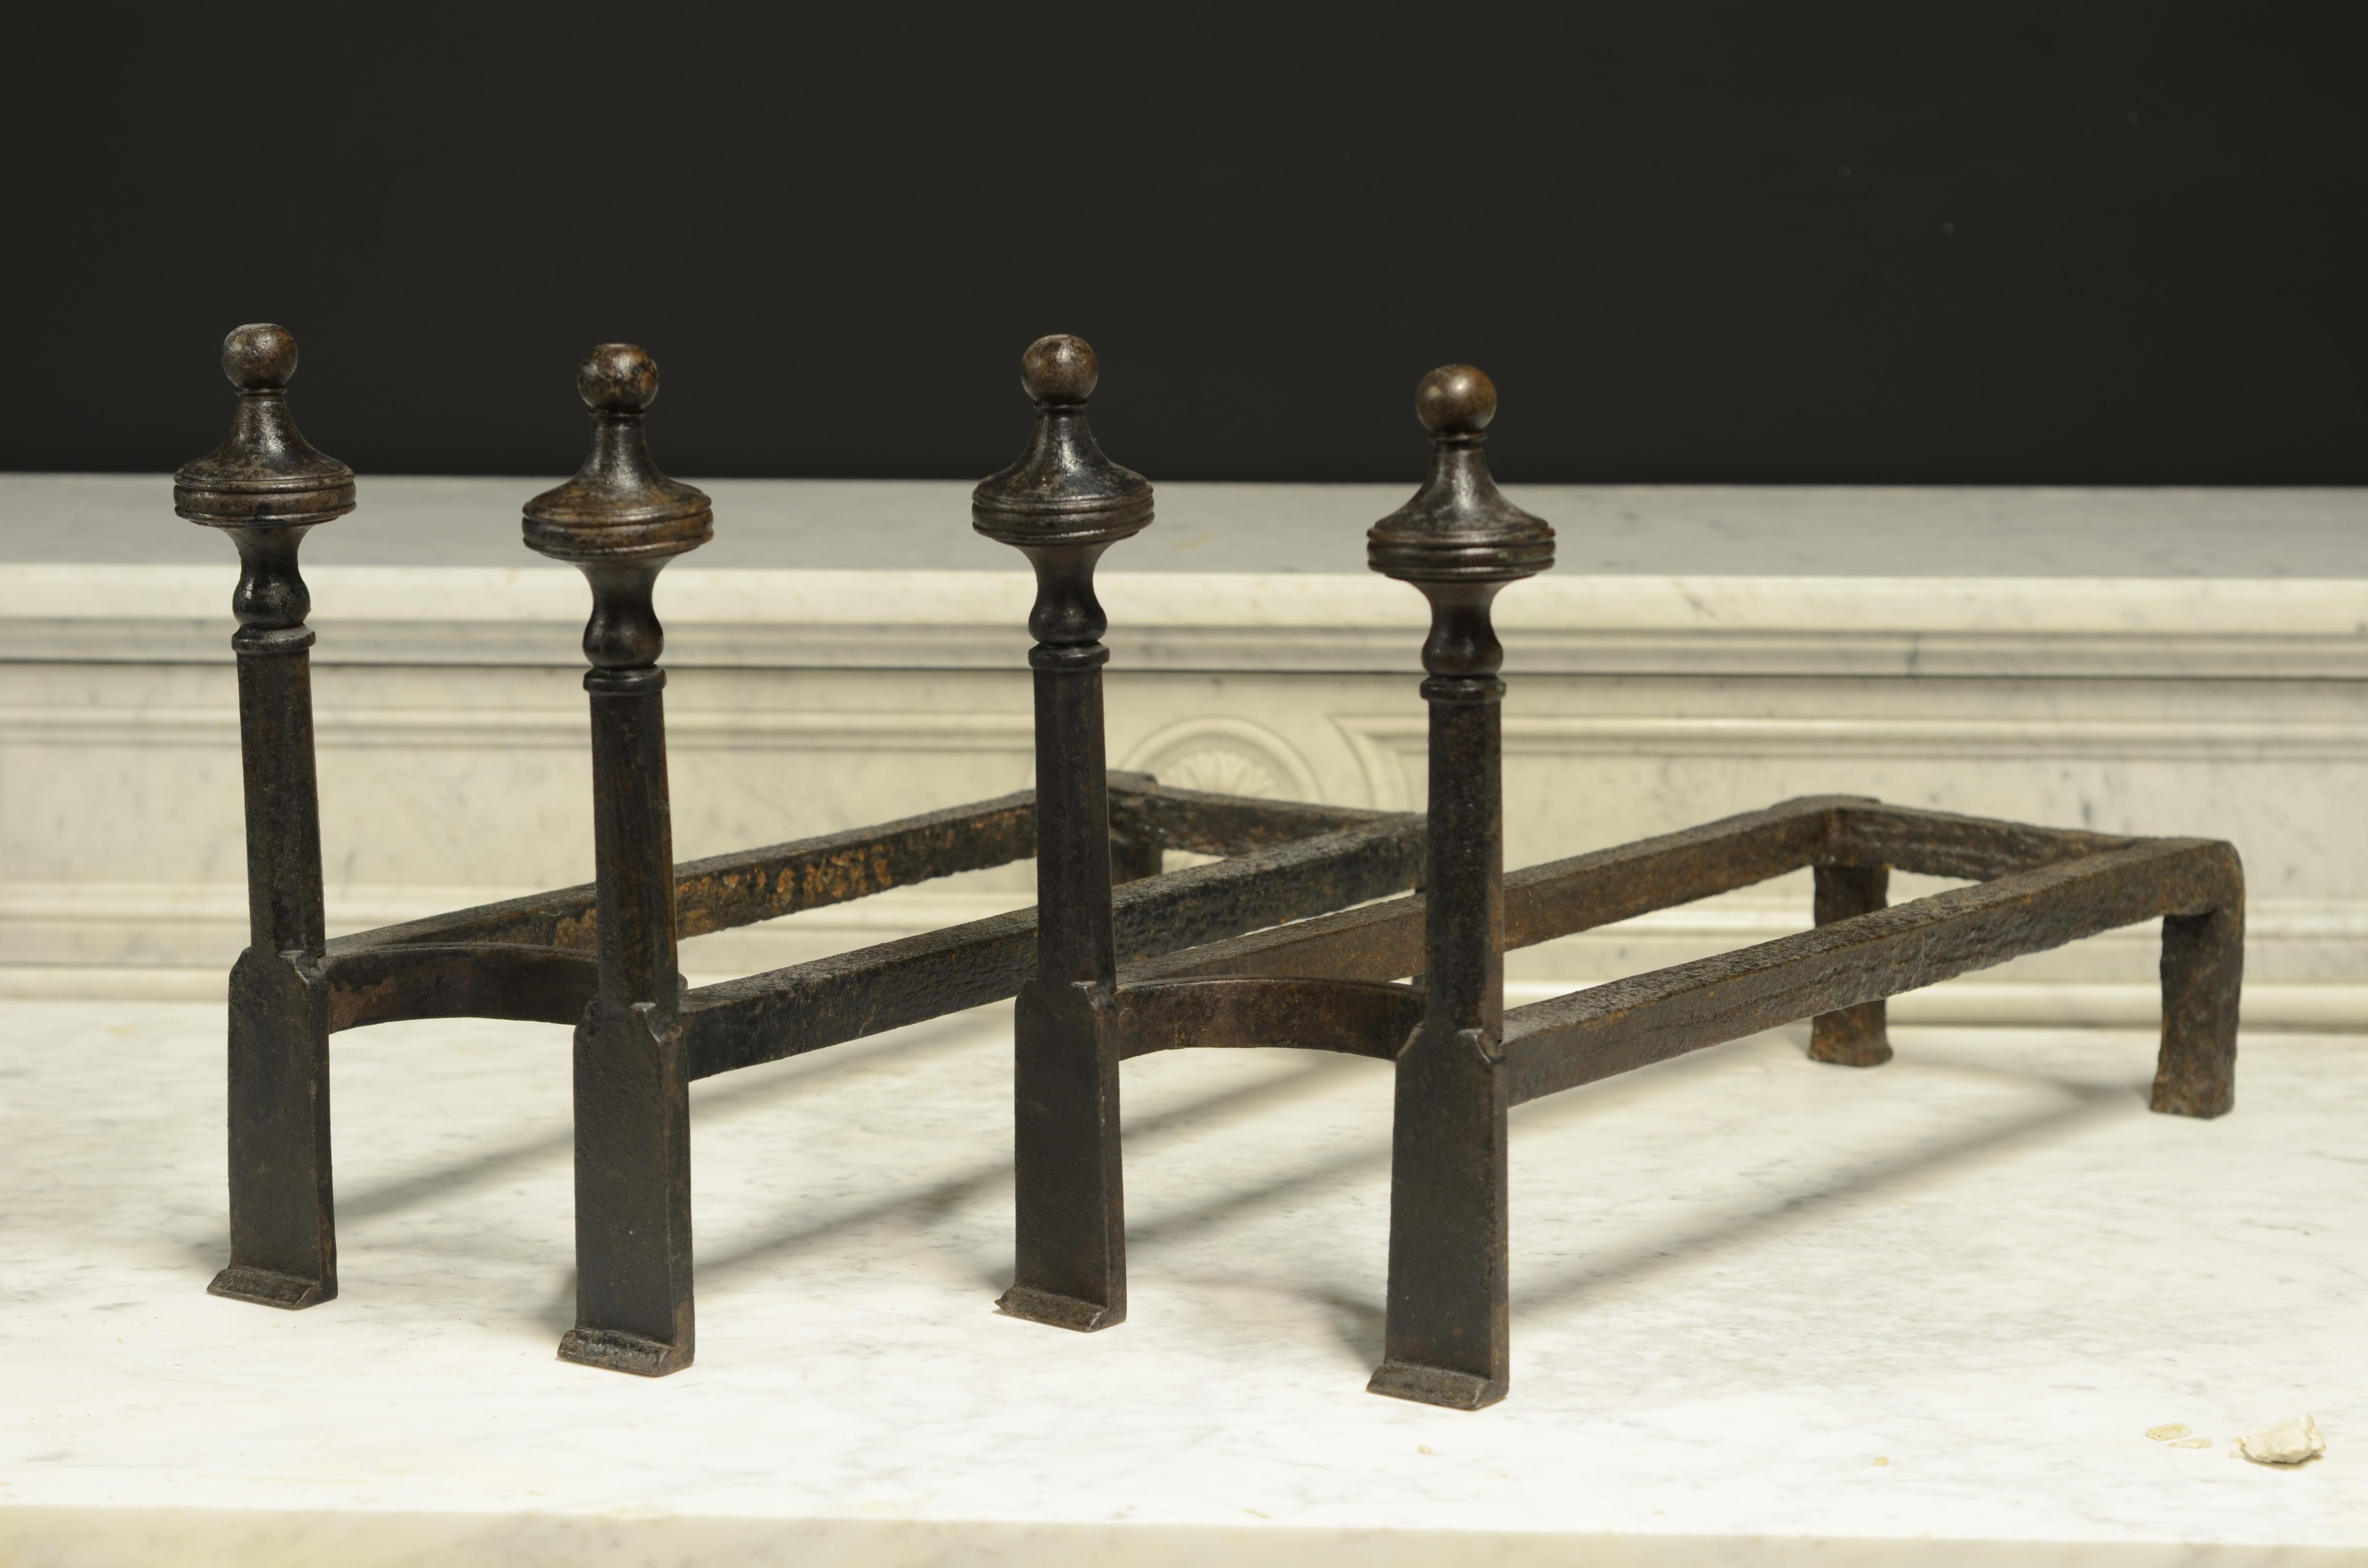 A nice original set of French andirons.
Showing the beautiful craftsmanship of the blacksmiths from the 18th century.

This pair is in great condition with the perfect used patina.

The double bars make stacking the fire easier and safer they